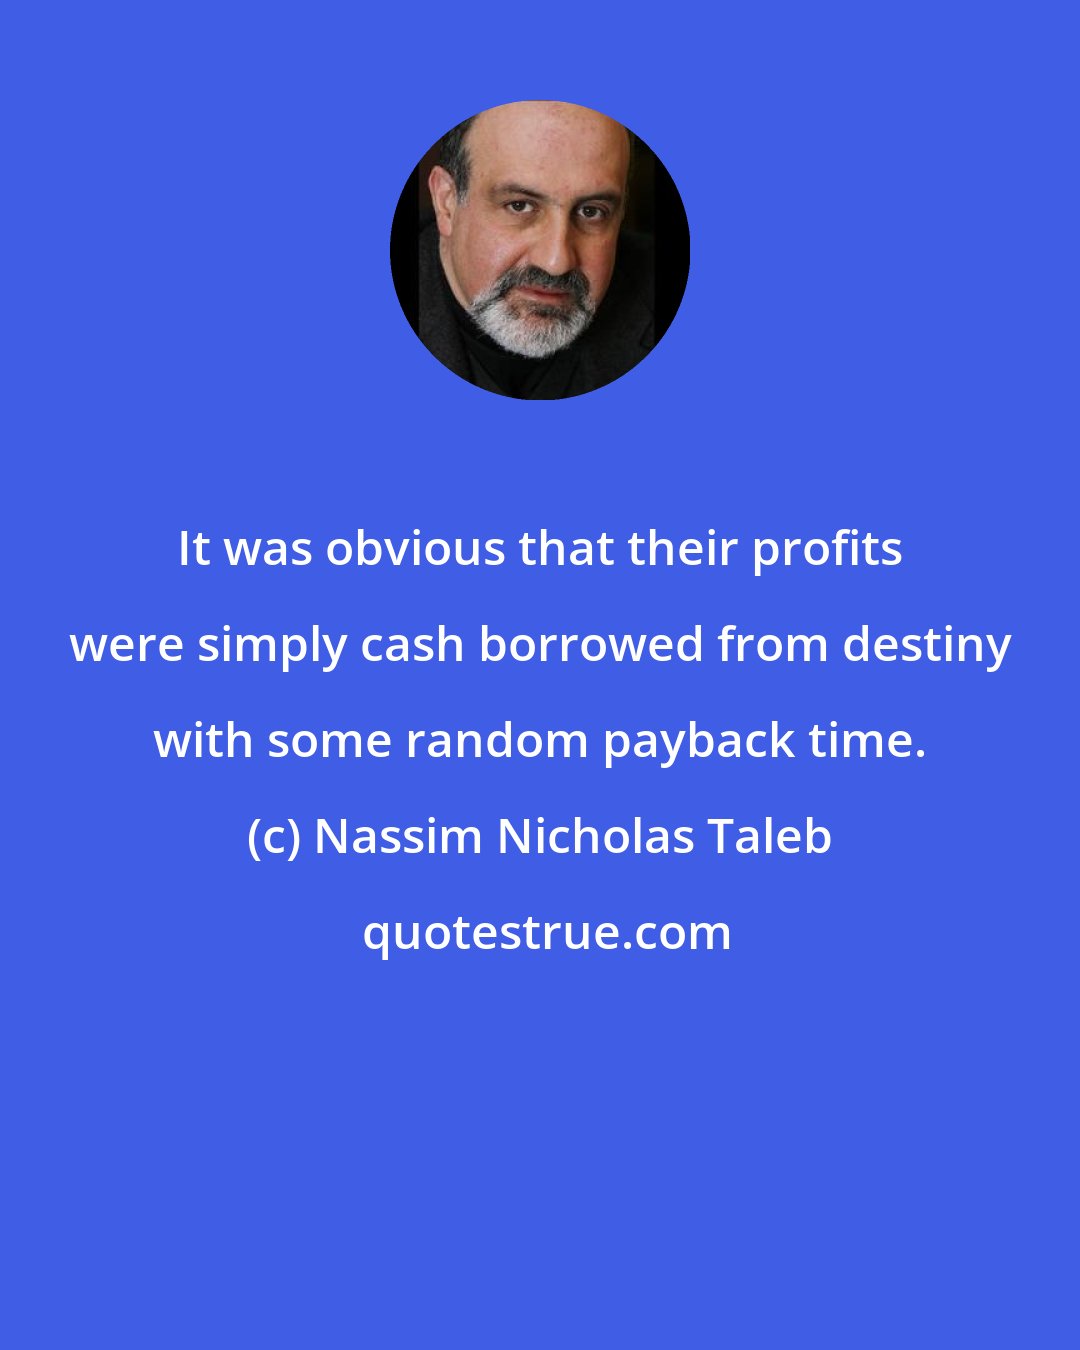 Nassim Nicholas Taleb: It was obvious that their profits were simply cash borrowed from destiny with some random payback time.